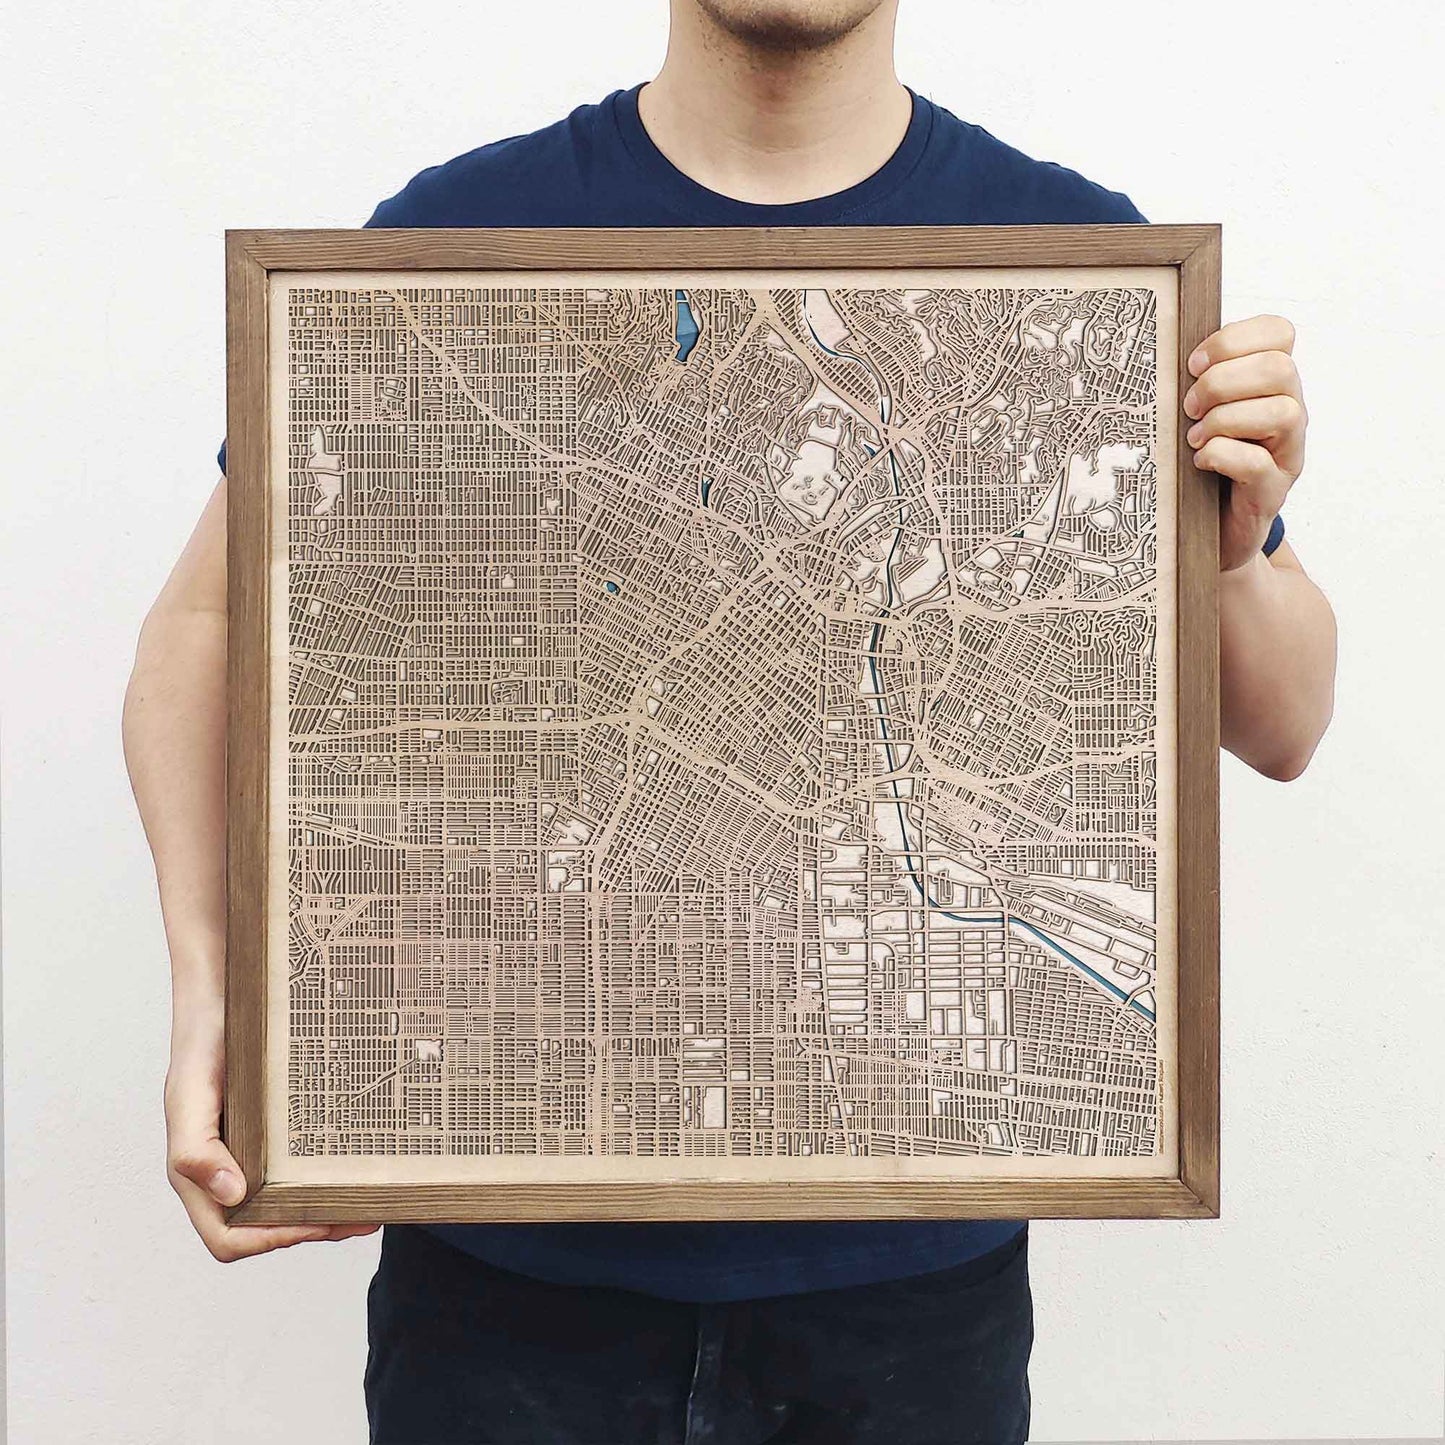 Los Angeles Wooden Map by CityWood - Custom Wood Map Art - Unique Laser Cut Engraved - Anniversary Gift